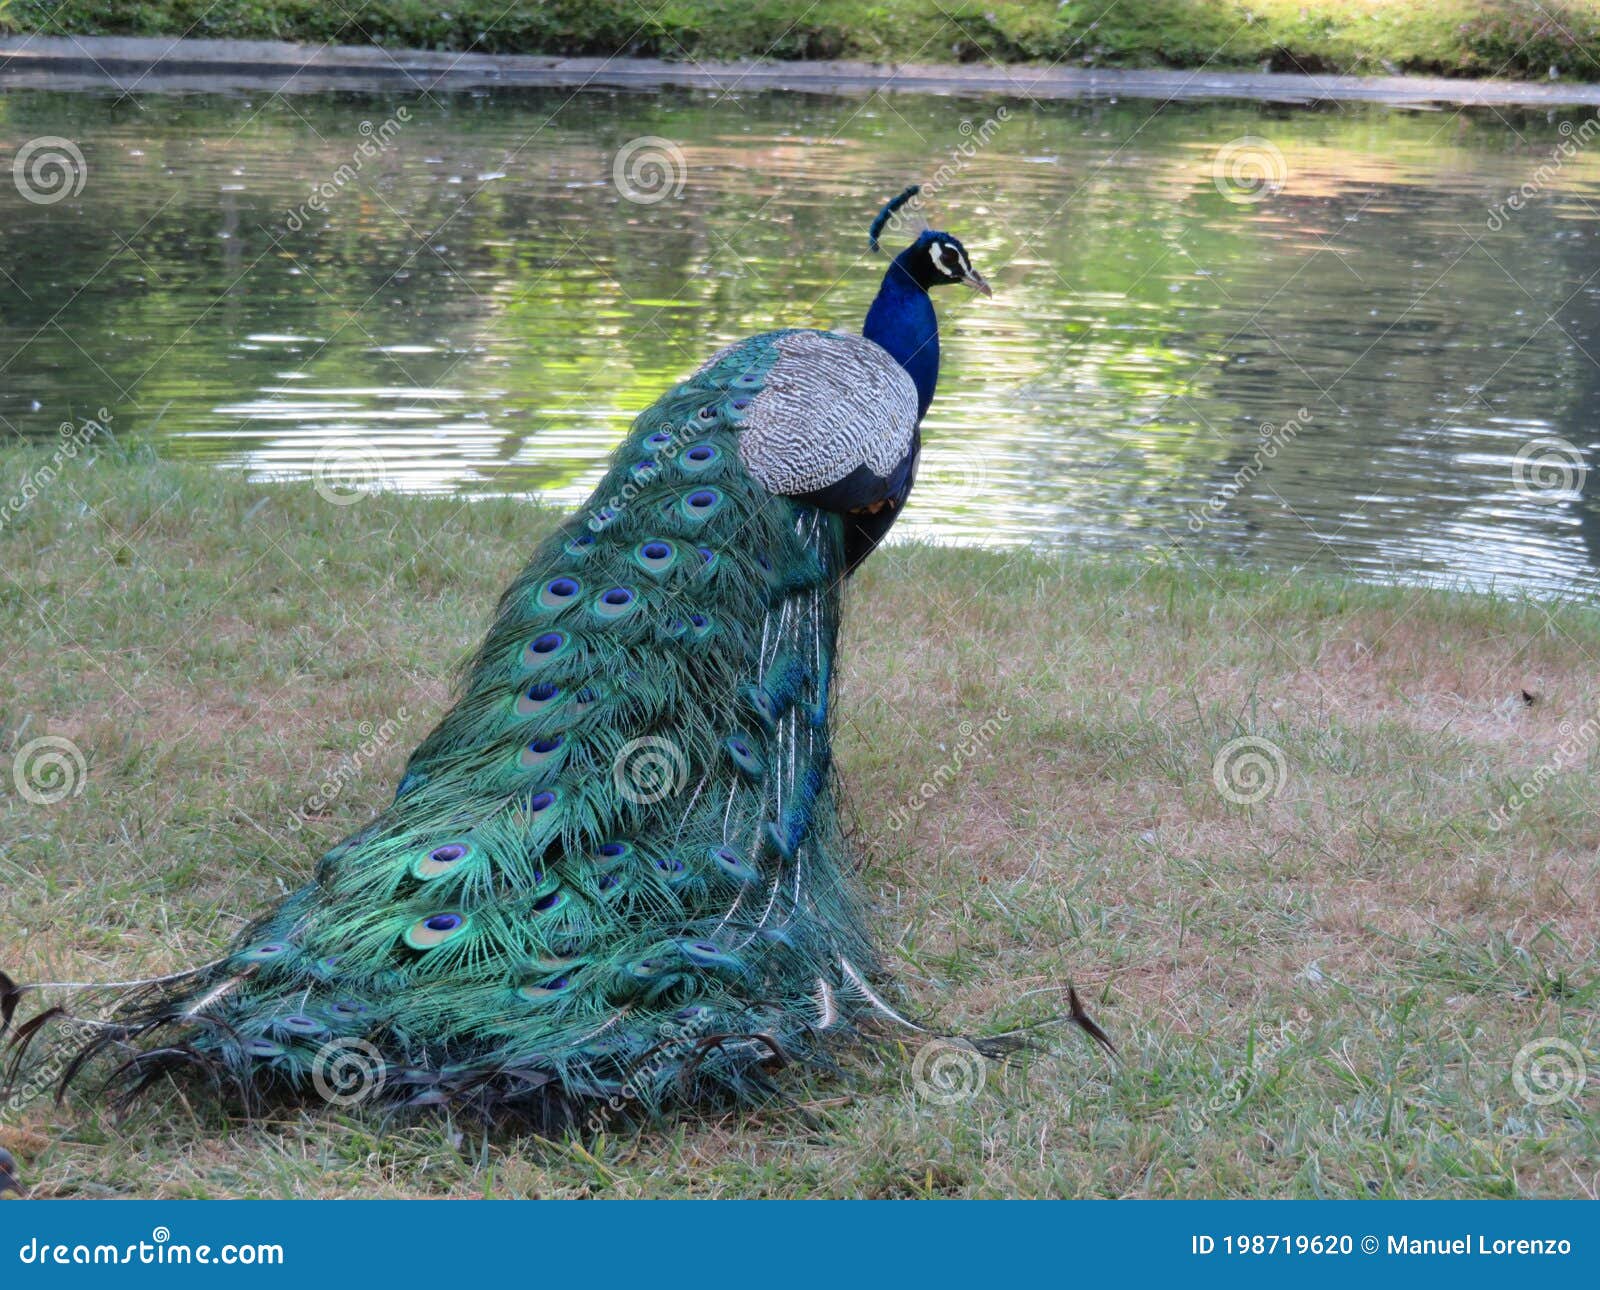 beautiful peacock of fantastic bright colors of long feathers